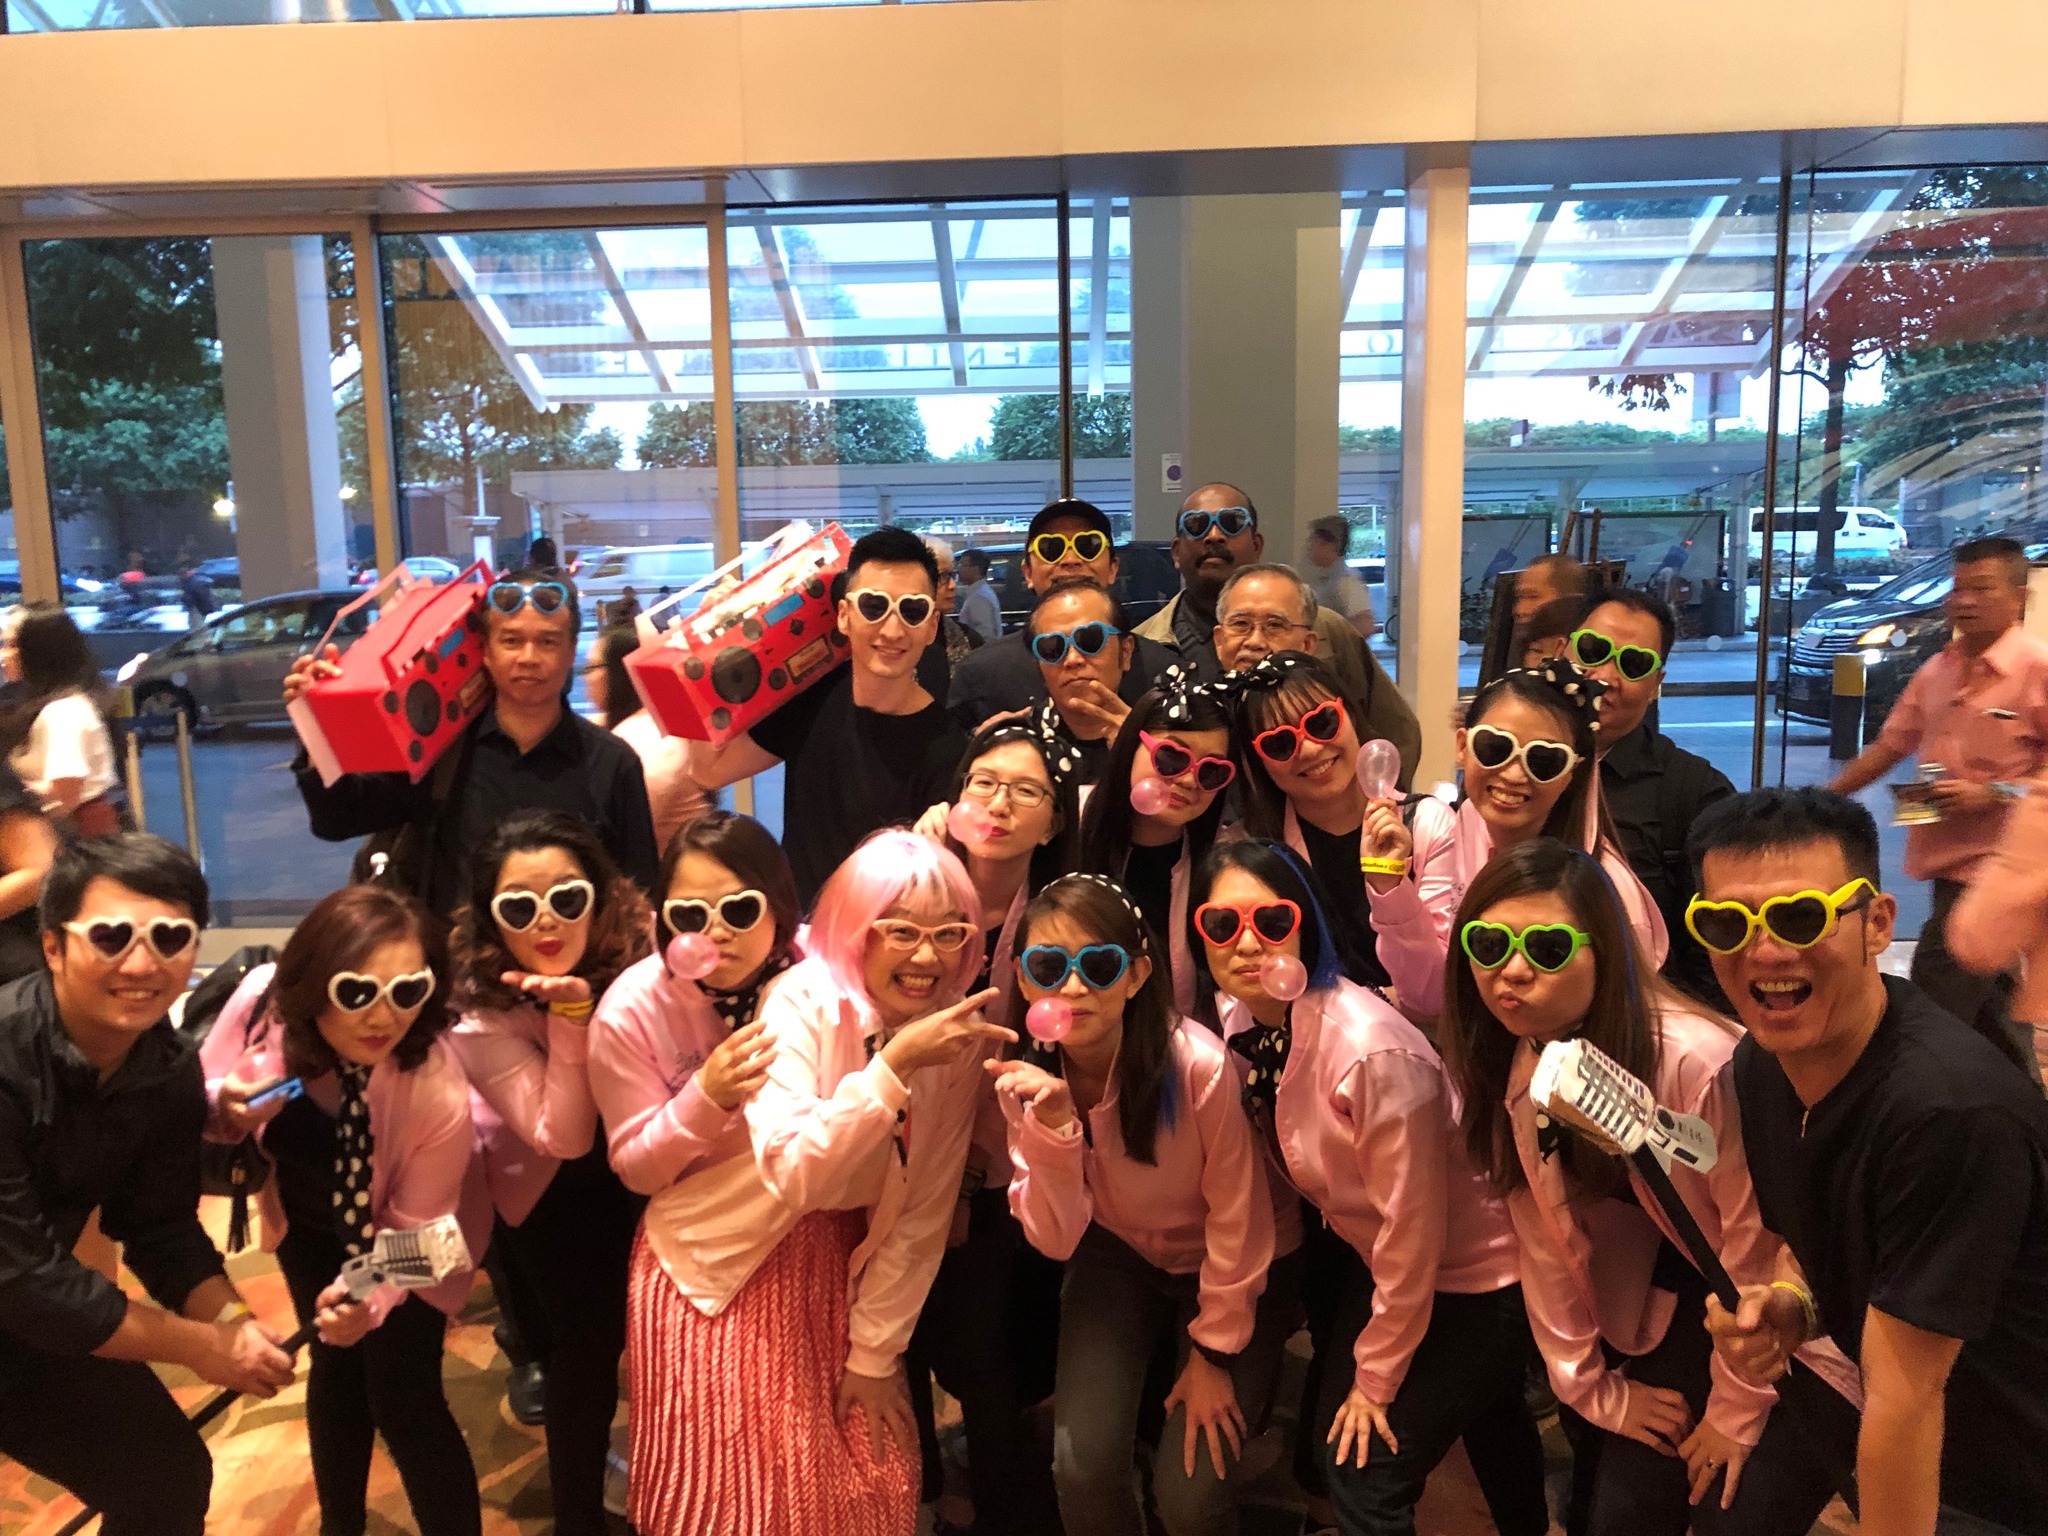 Hwee Cheng and her team dressed up according to the theme of the movie “Grease” at Frasers Property’s Dinner & Dance in 2019.